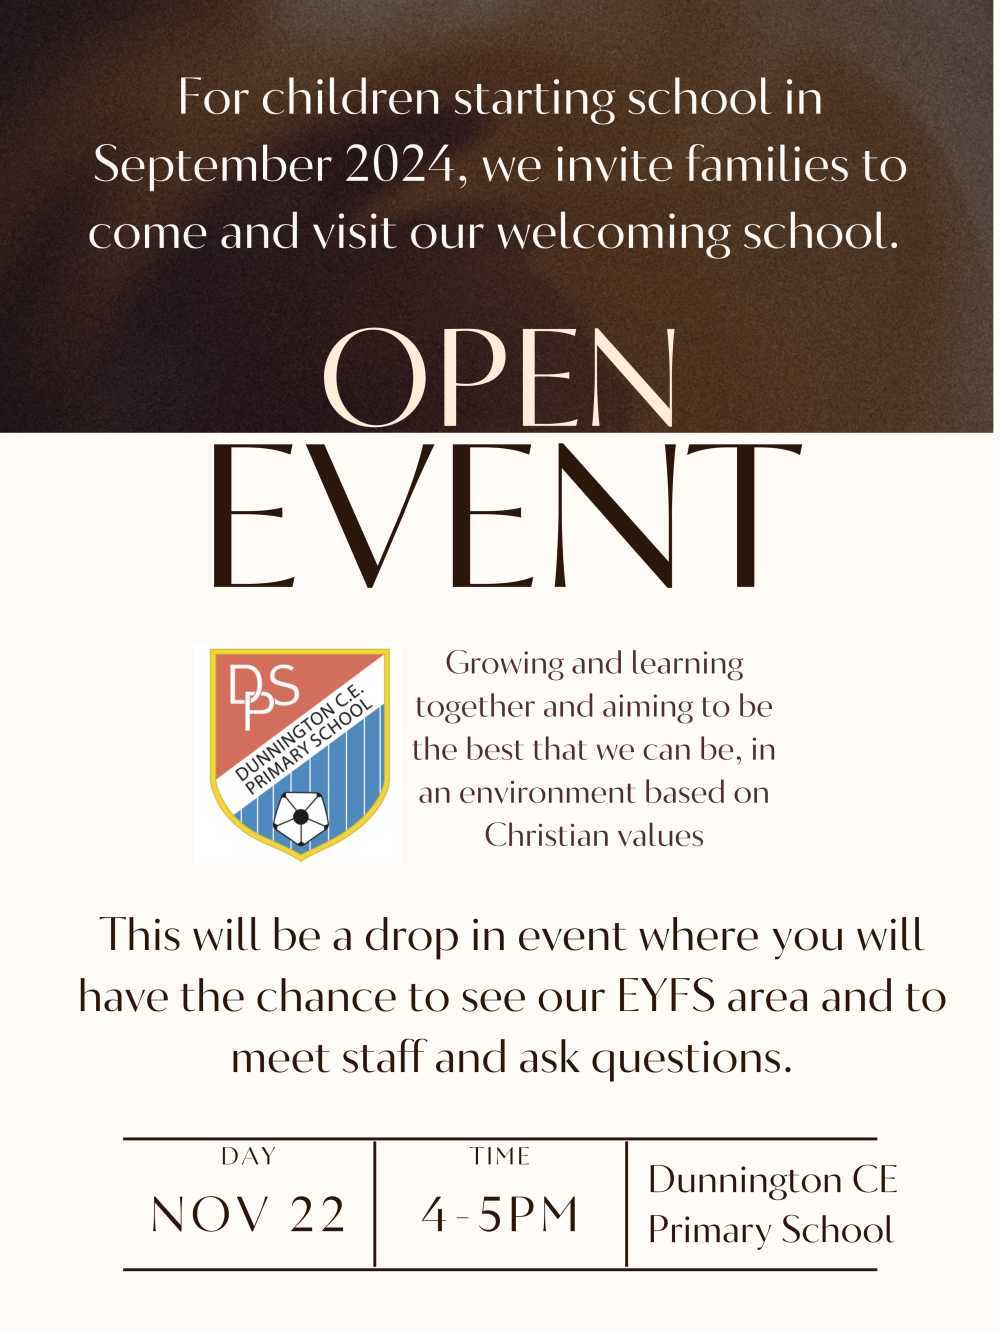 For children starting school in September 2024, we invite families to come and visit our welcoming school. This will be a drop in event where you will have the chance to see our EYFS area and to meet staff and ask questions. November 22nd, 4-5pm, Dunnington CE Primary School.